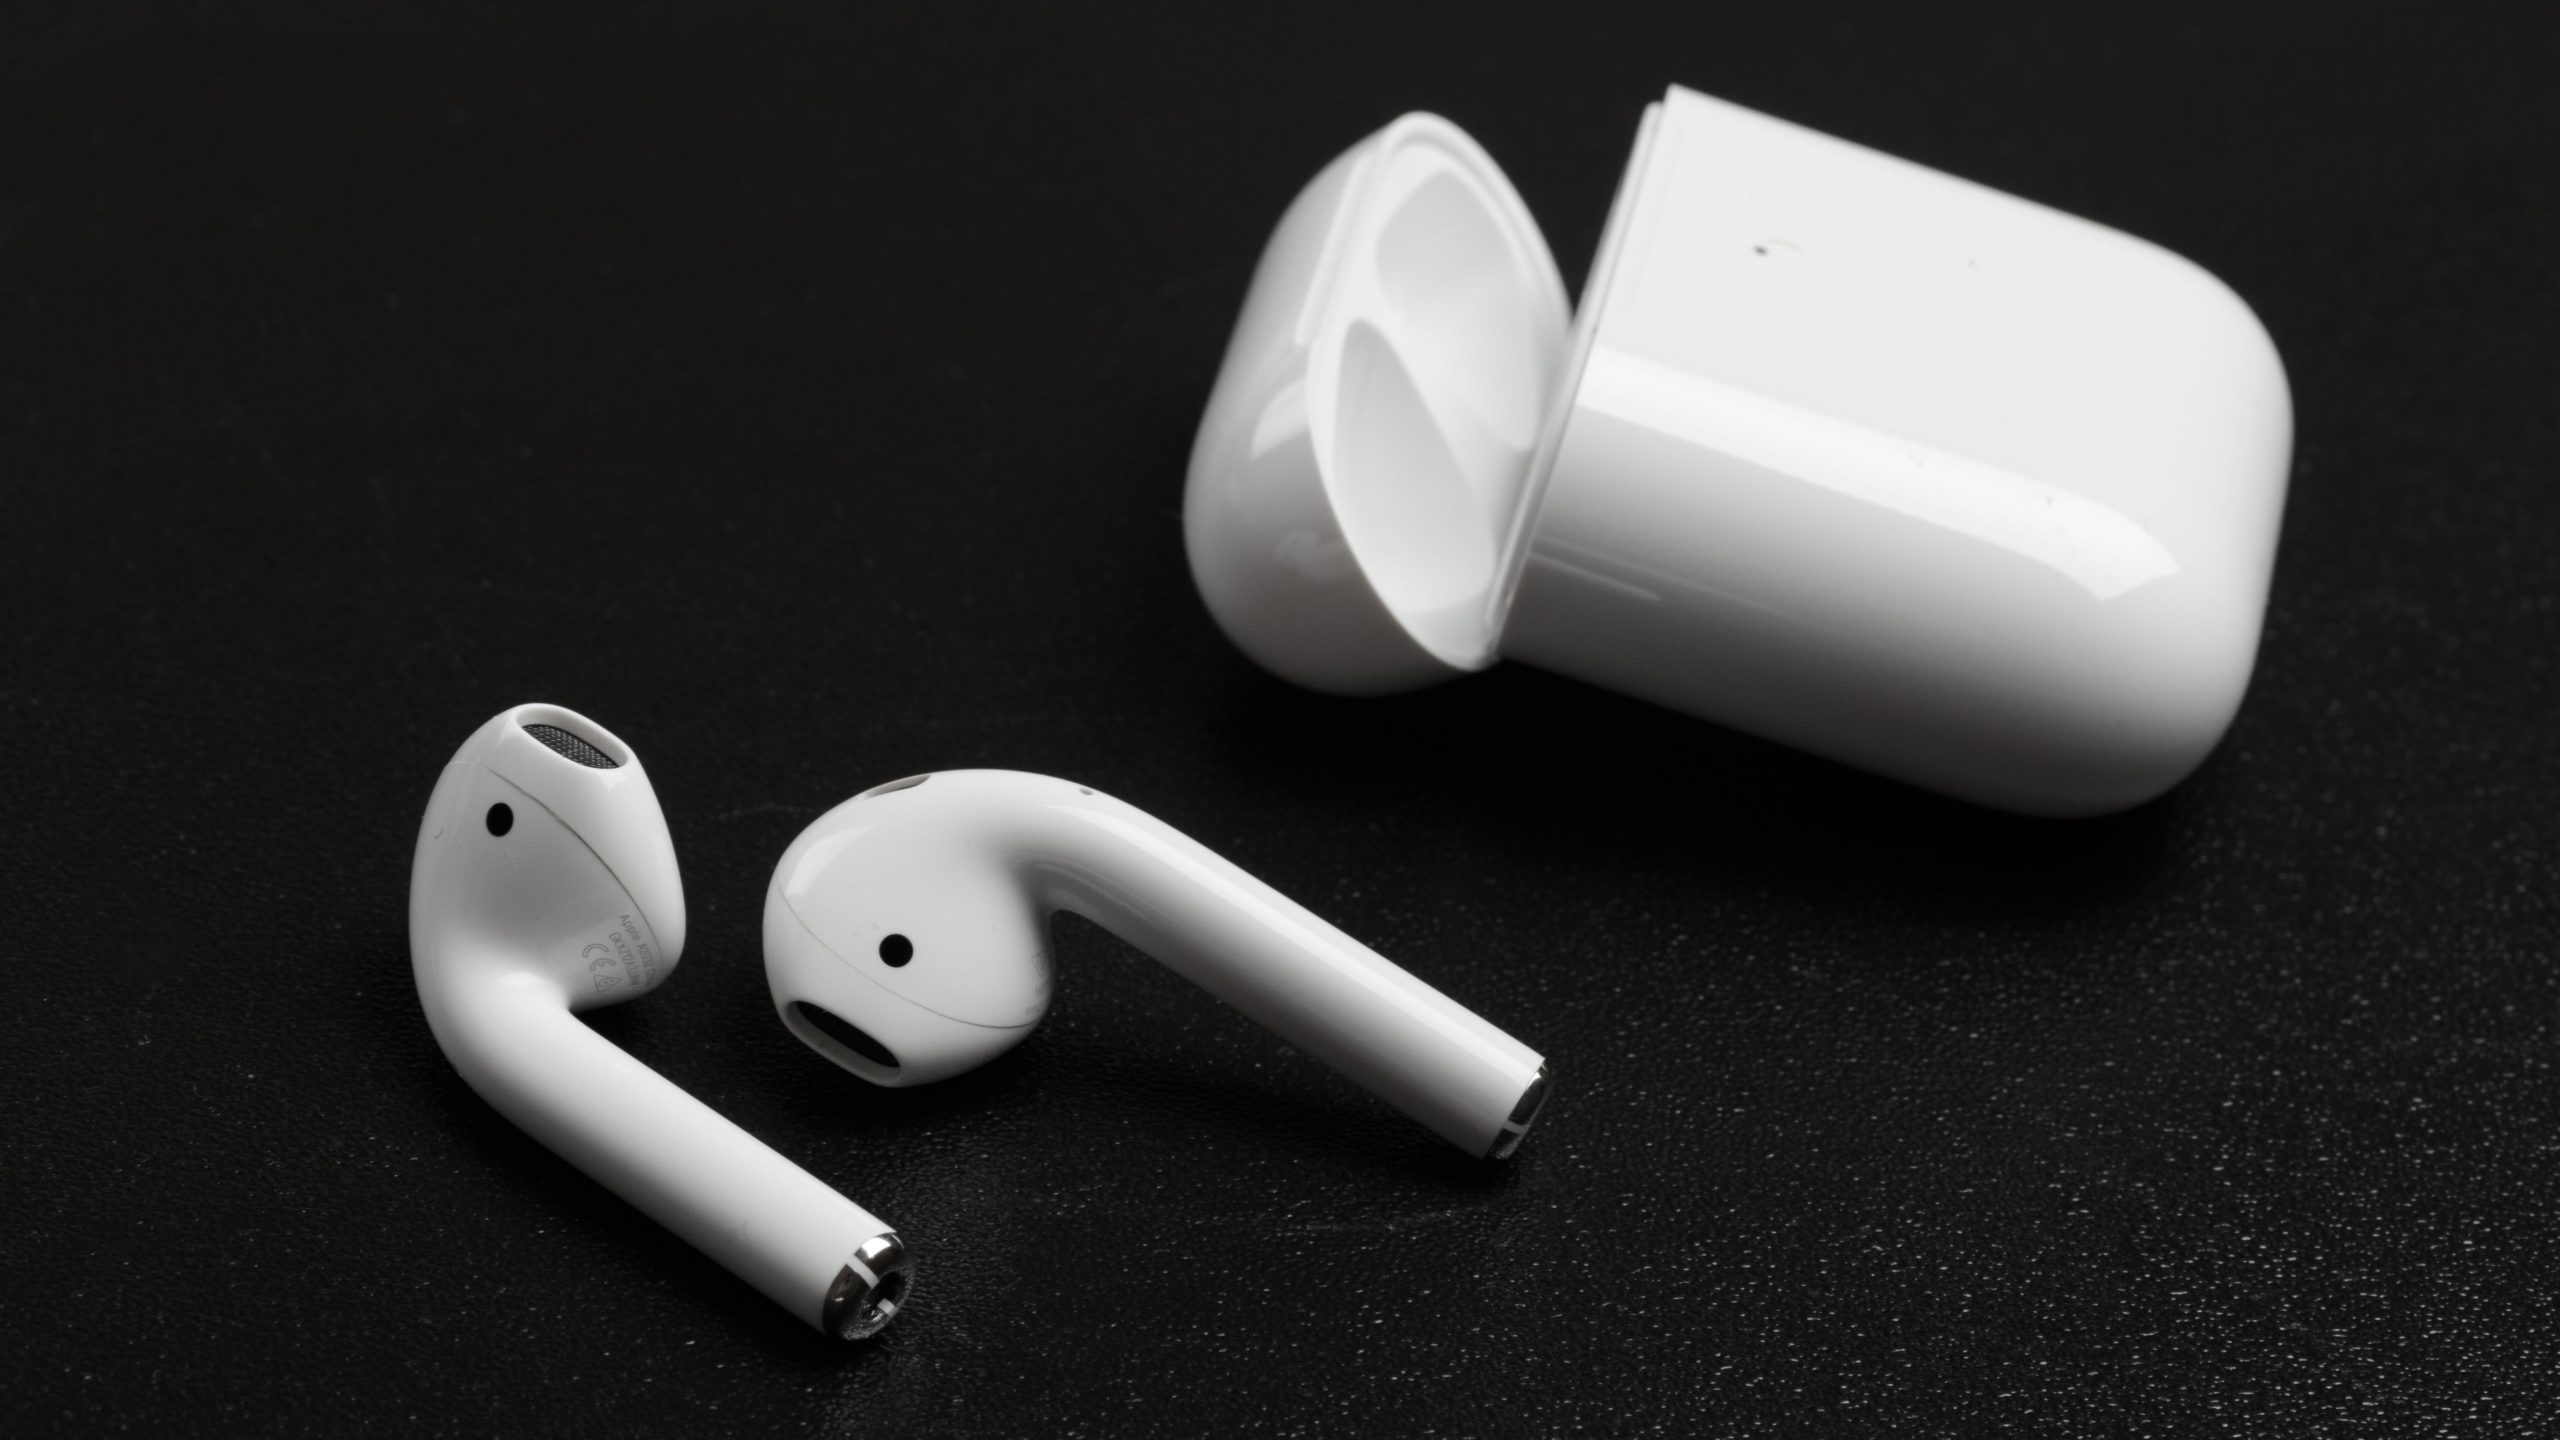 The ‘Find My’ App Won’t Magically Find Your Lost AirPods After All